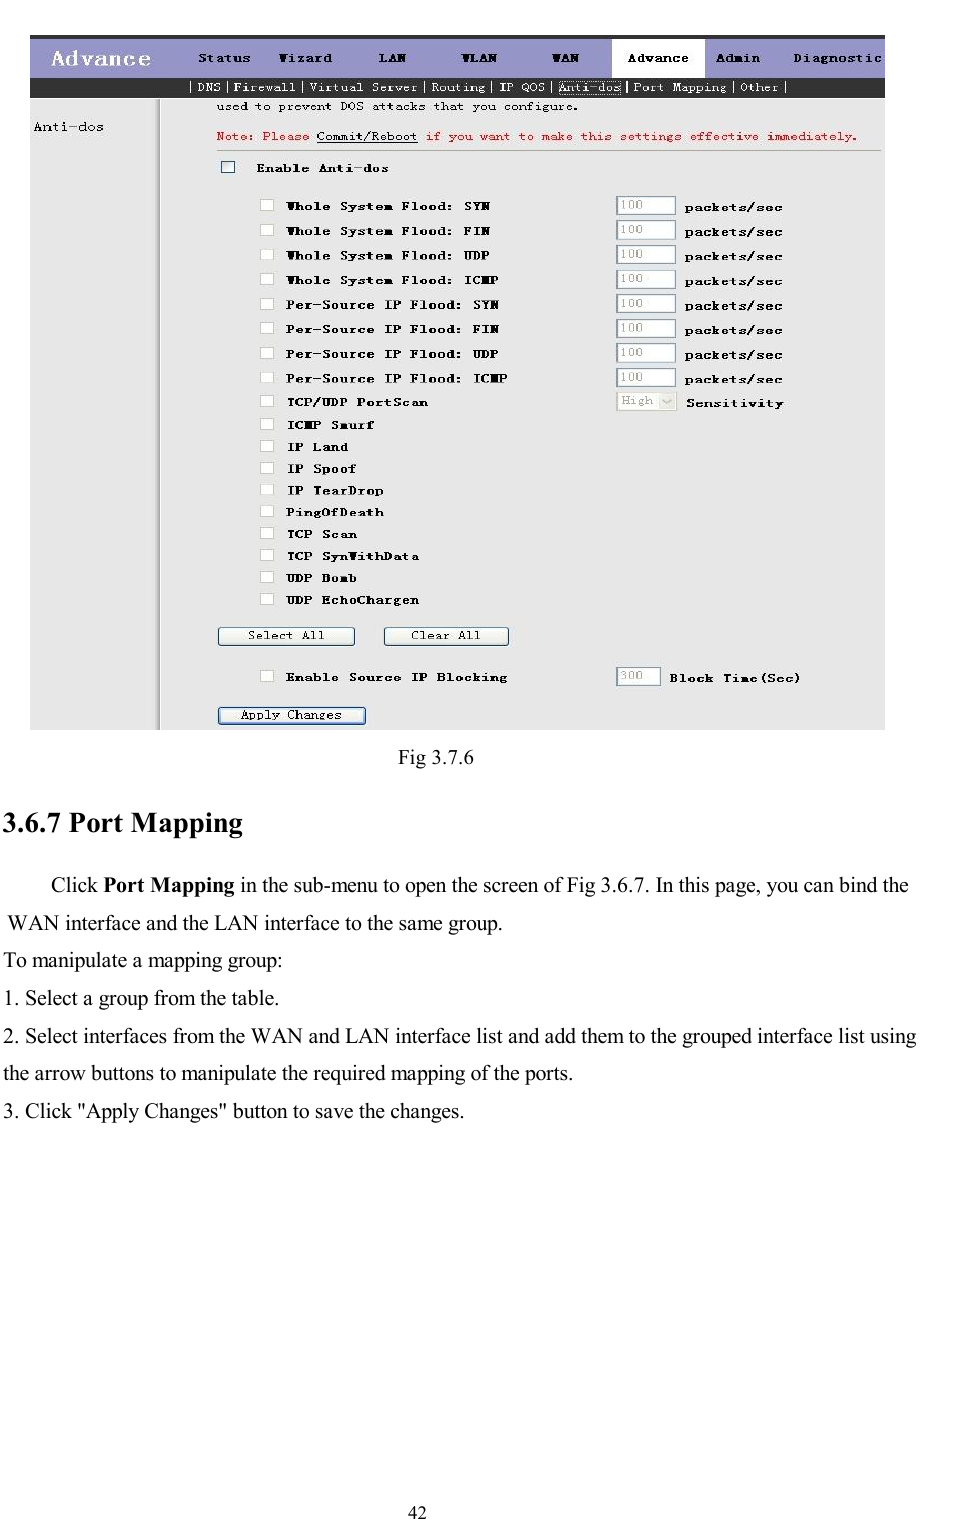                                                                     42  Fig 3.7.6 3.6.7 Port Mapping Click Port Mapping in the sub-menu to open the screen of Fig 3.6.7. In this page, you can bind the WAN interface and the LAN interface to the same group.  To manipulate a mapping group: 1. Select a group from the table. 2. Select interfaces from the WAN and LAN interface list and add them to the grouped interface list using the arrow buttons to manipulate the required mapping of the ports. 3. Click &quot;Apply Changes&quot; button to save the changes. 